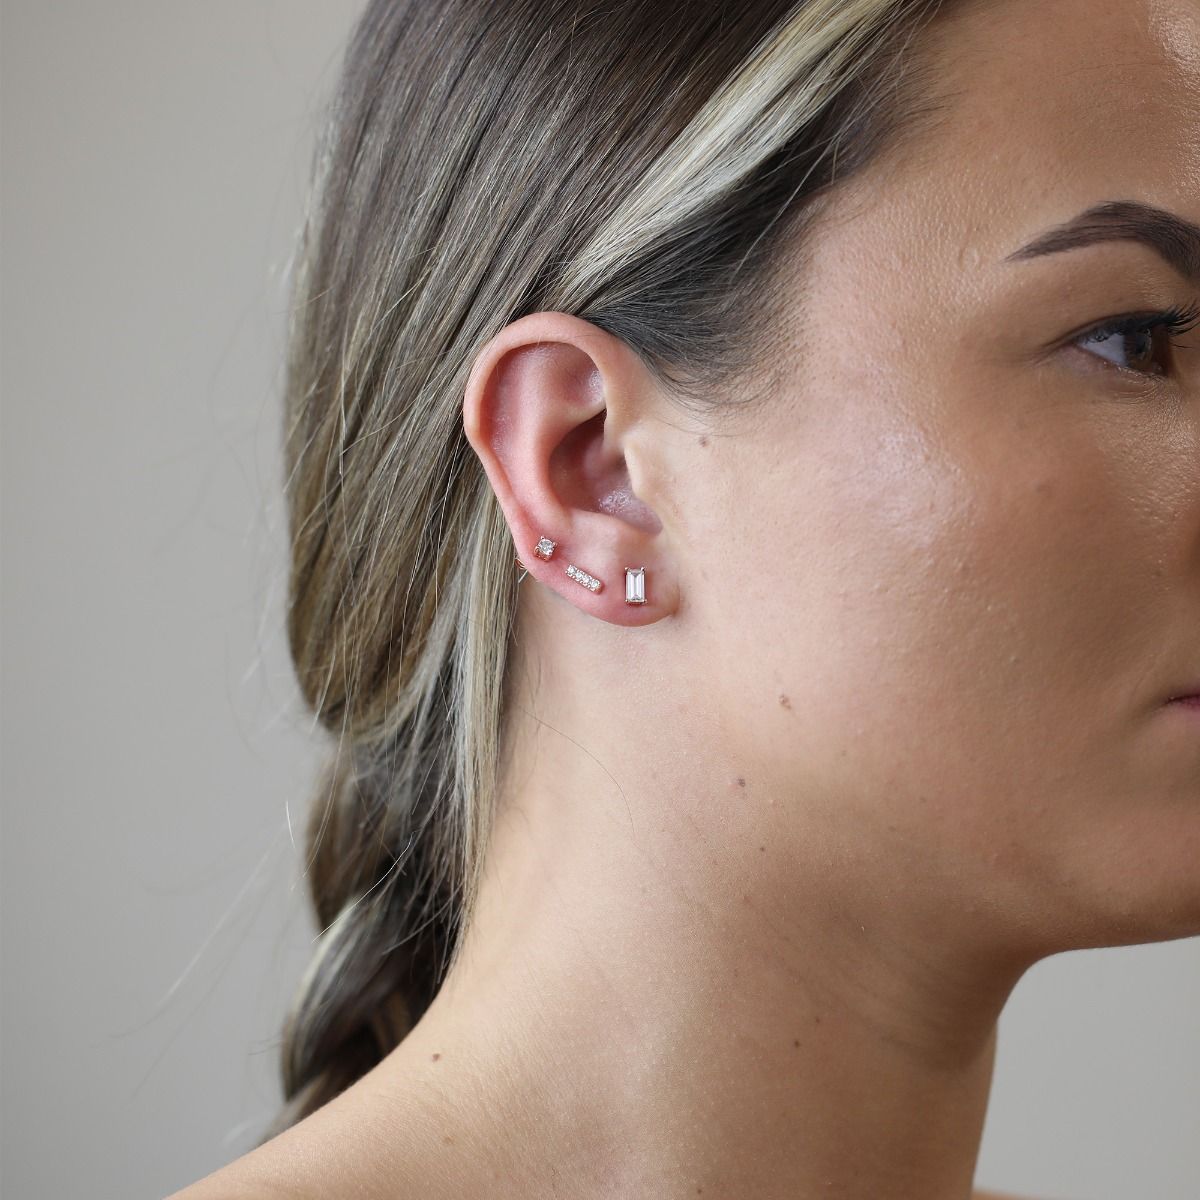 The Set of Three Crystal Earrings are an everyday necessity as they pair rose gold with clear crystals to make a subtle statement. Wear separately or mix and match to customise your look.